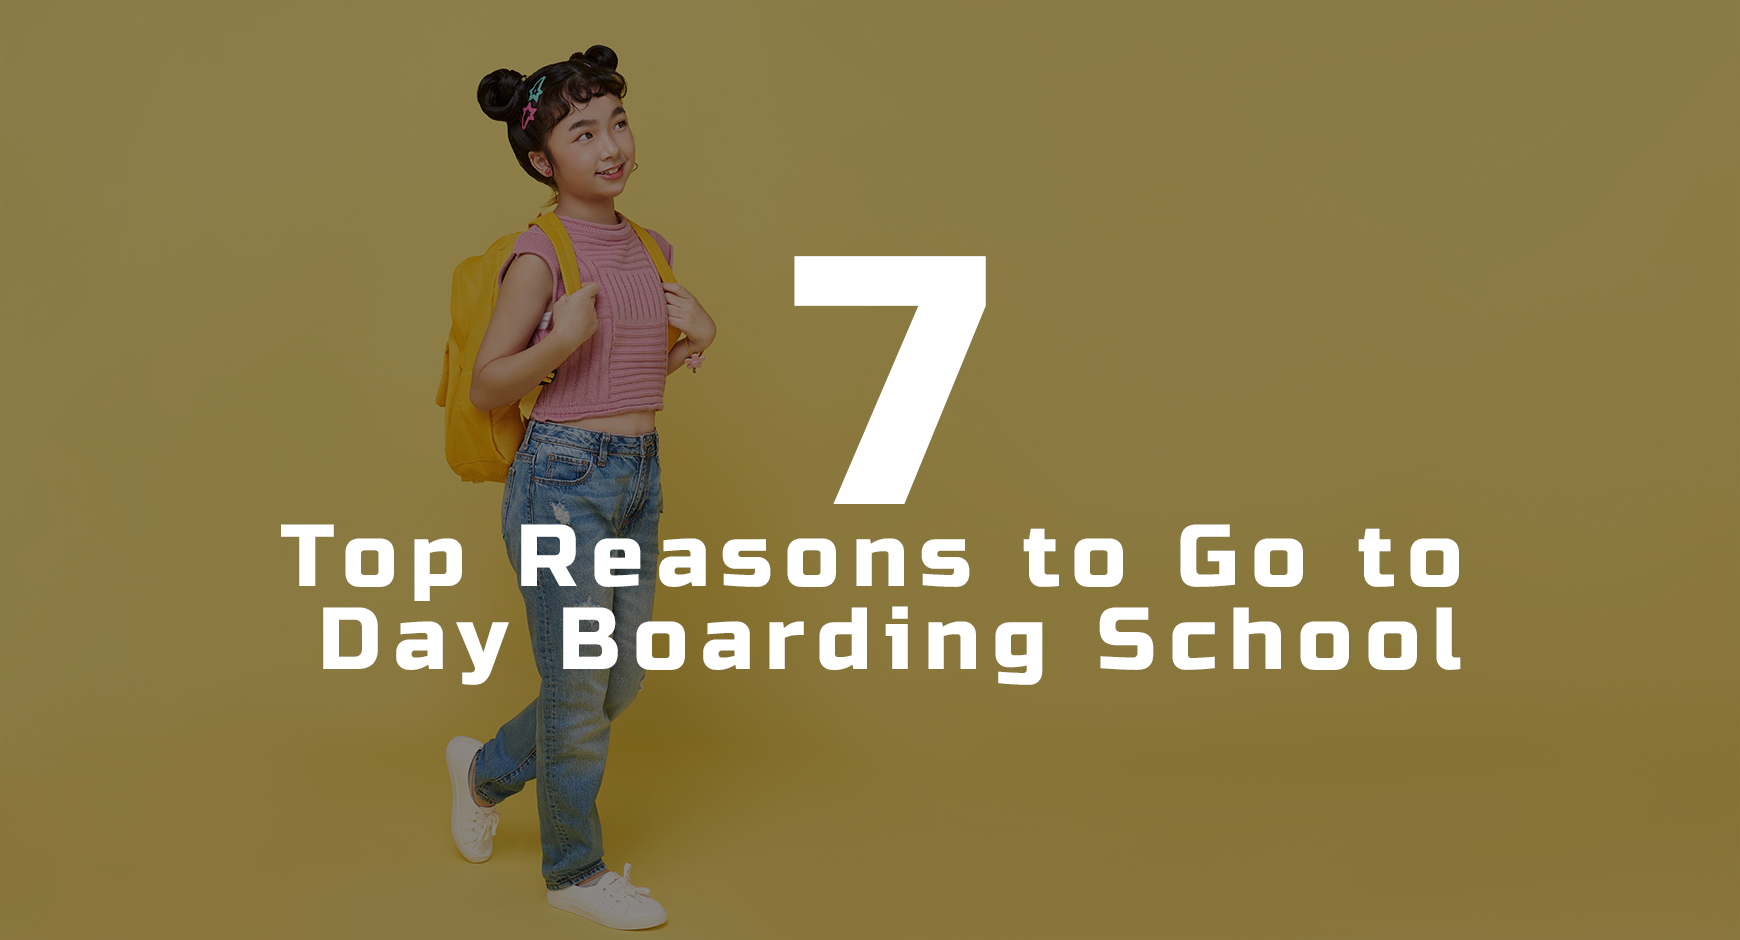 7 Top Reasons to Go to Day Boarding School